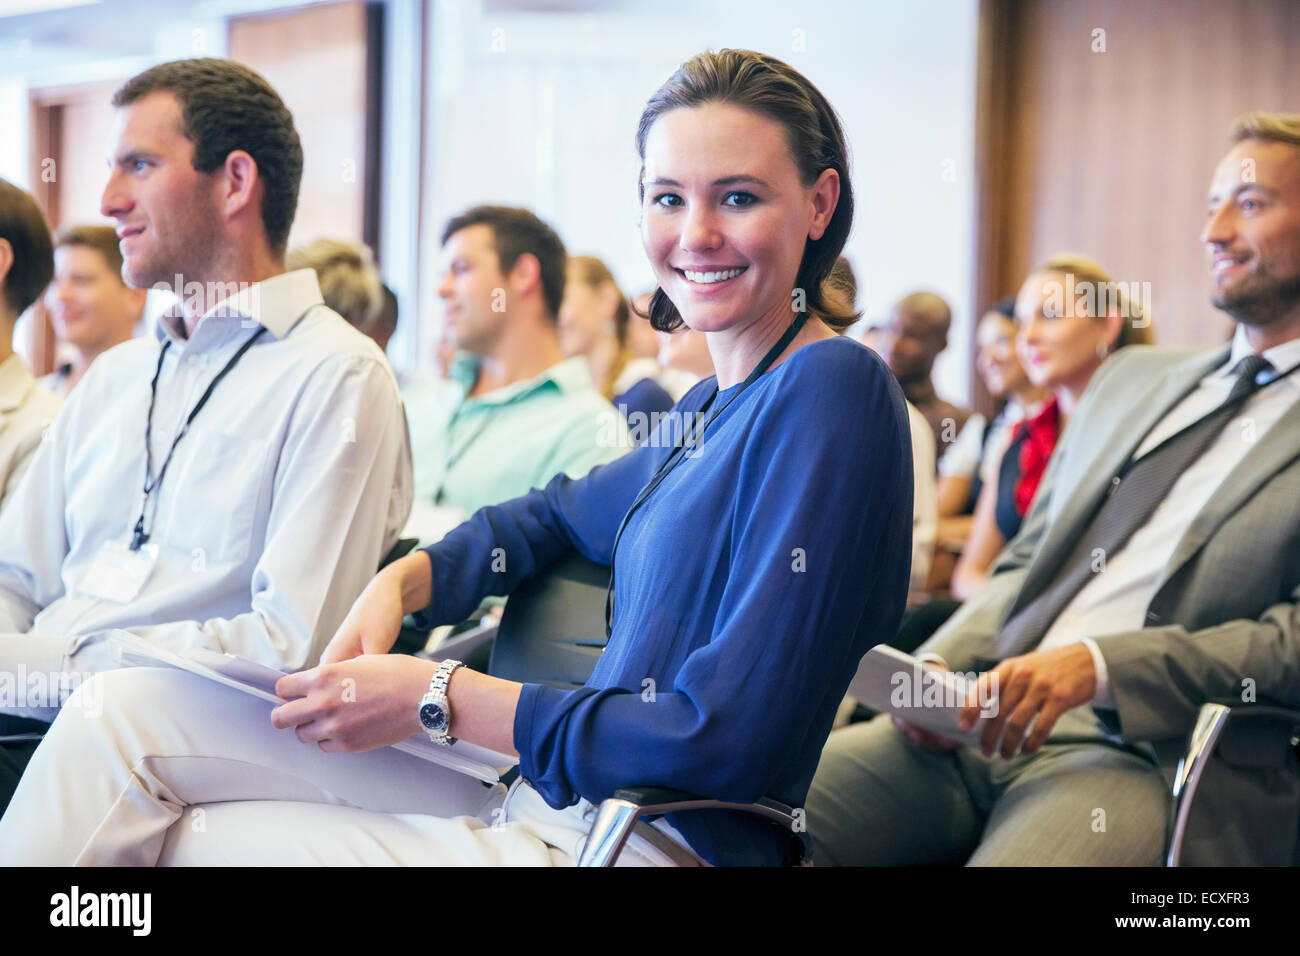 Portrait of smiling young woman sitting in audience in conference room Stock Photo